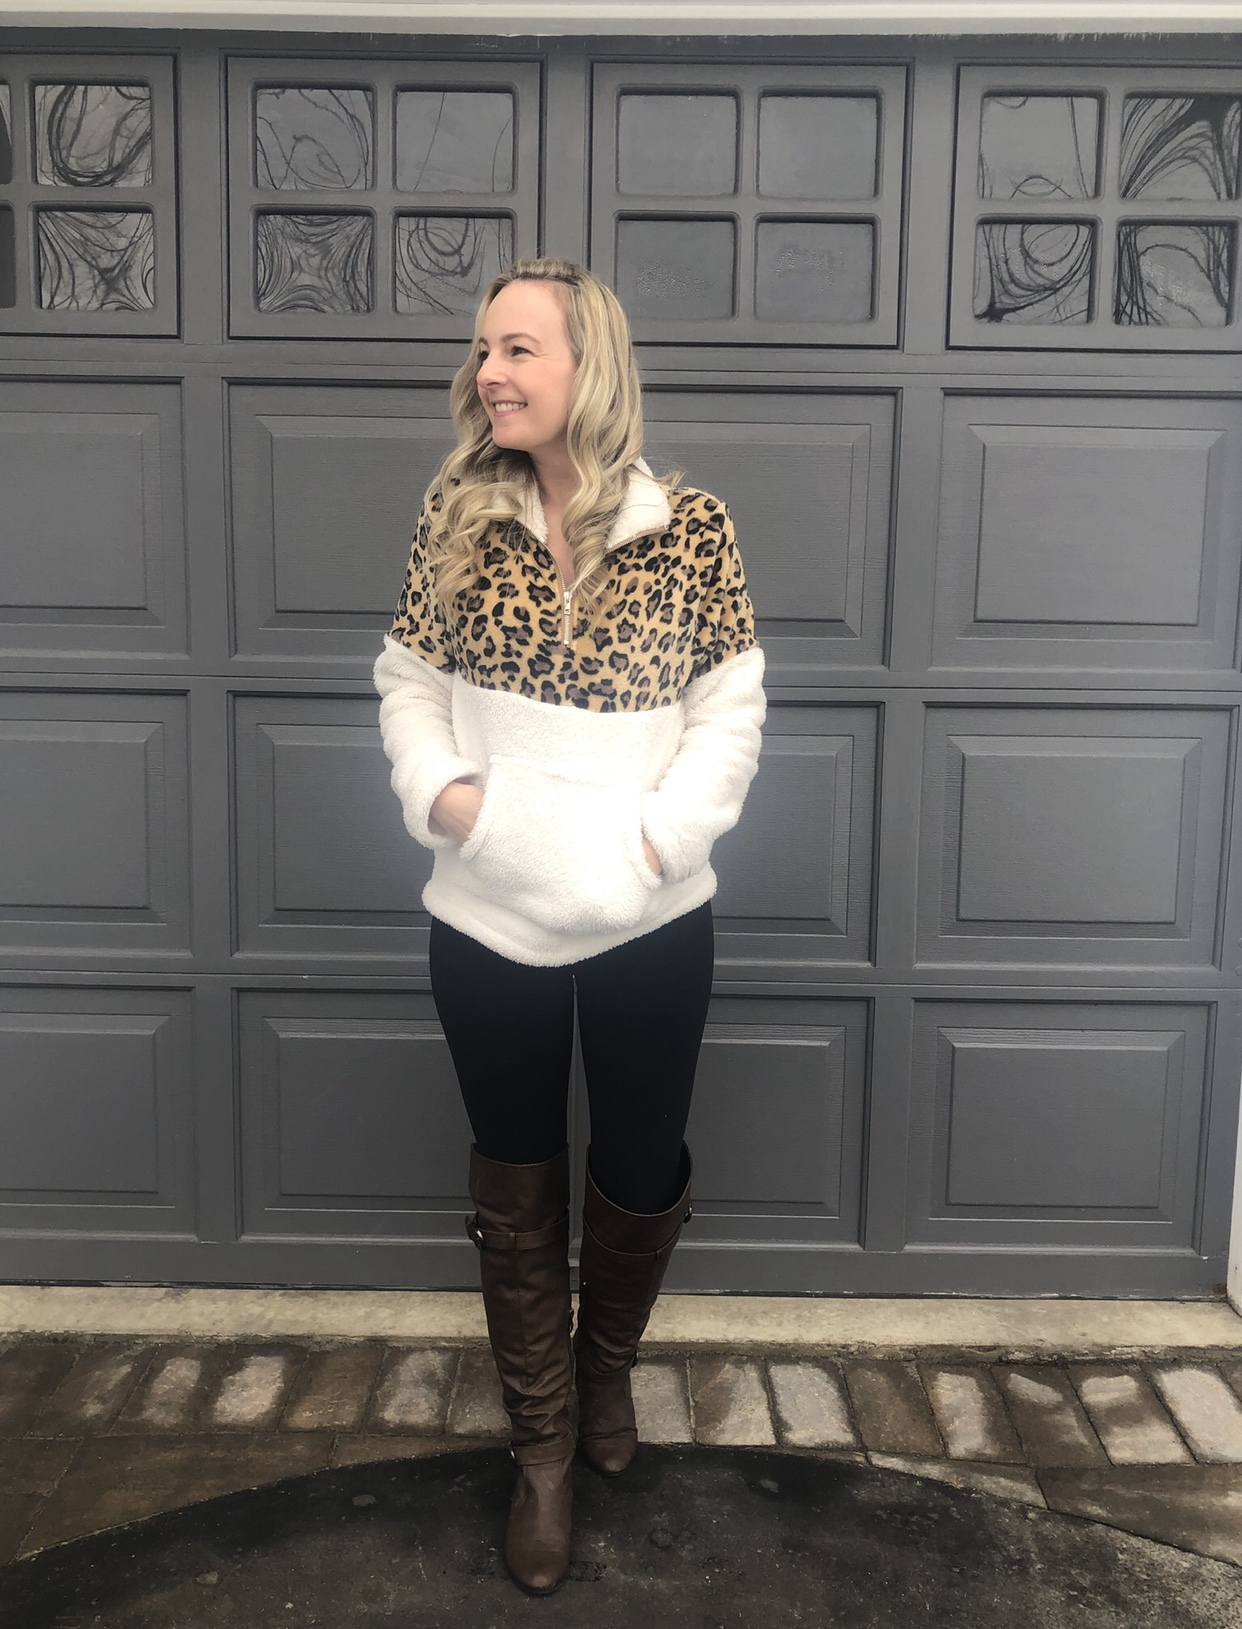 Leopard Sweater from Shein on Livin' Life with Style